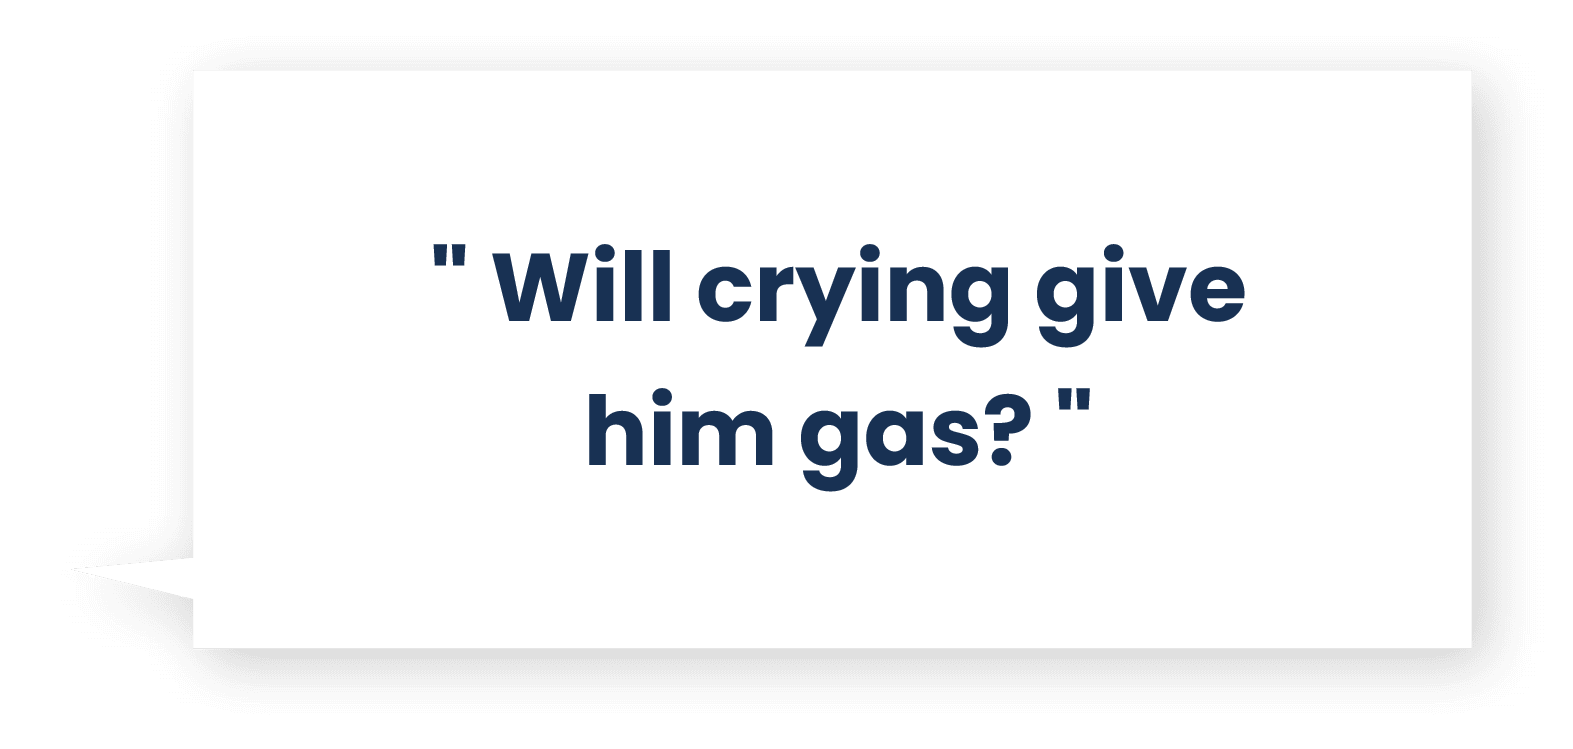 Will crying give him gas?